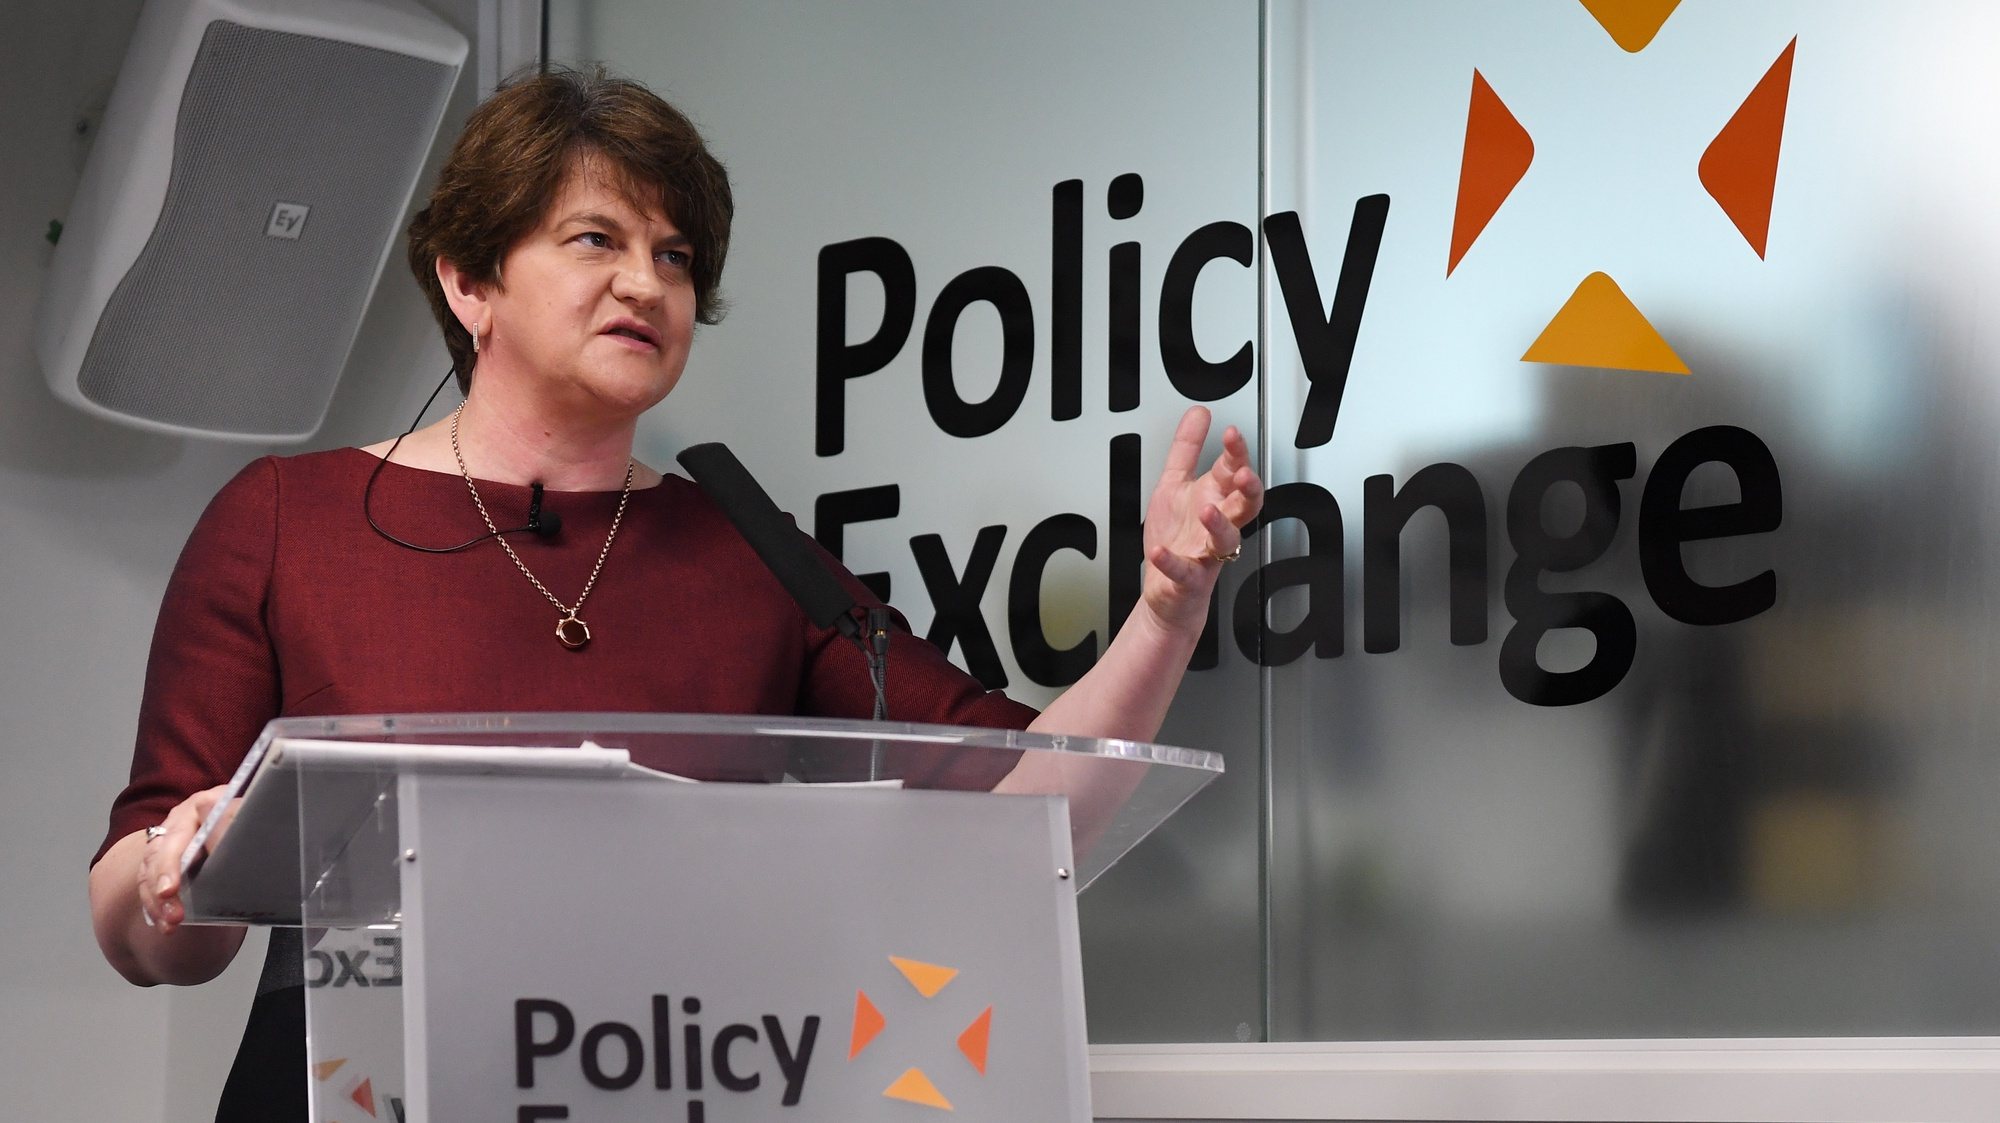 epa09165636 (FILE) - Northern Ireland Democratic Unionist Party (DUP) leader Arlene Foster speaks at an event on the Brexit Irish backstop, at Policy Exchange in Westminster London, Britain, 26 June 2019 (reissued 28 April 2021). Arlene Foster on 28 April 2021 in a statement announced she will be stepping down as Democratic Unionist Party (DUP) party leader on 20 May and as First Minister of Northern Ireland by the end of June.  EPA/FACUNDO ARRIZABALAGA *** Local Caption *** 55299694